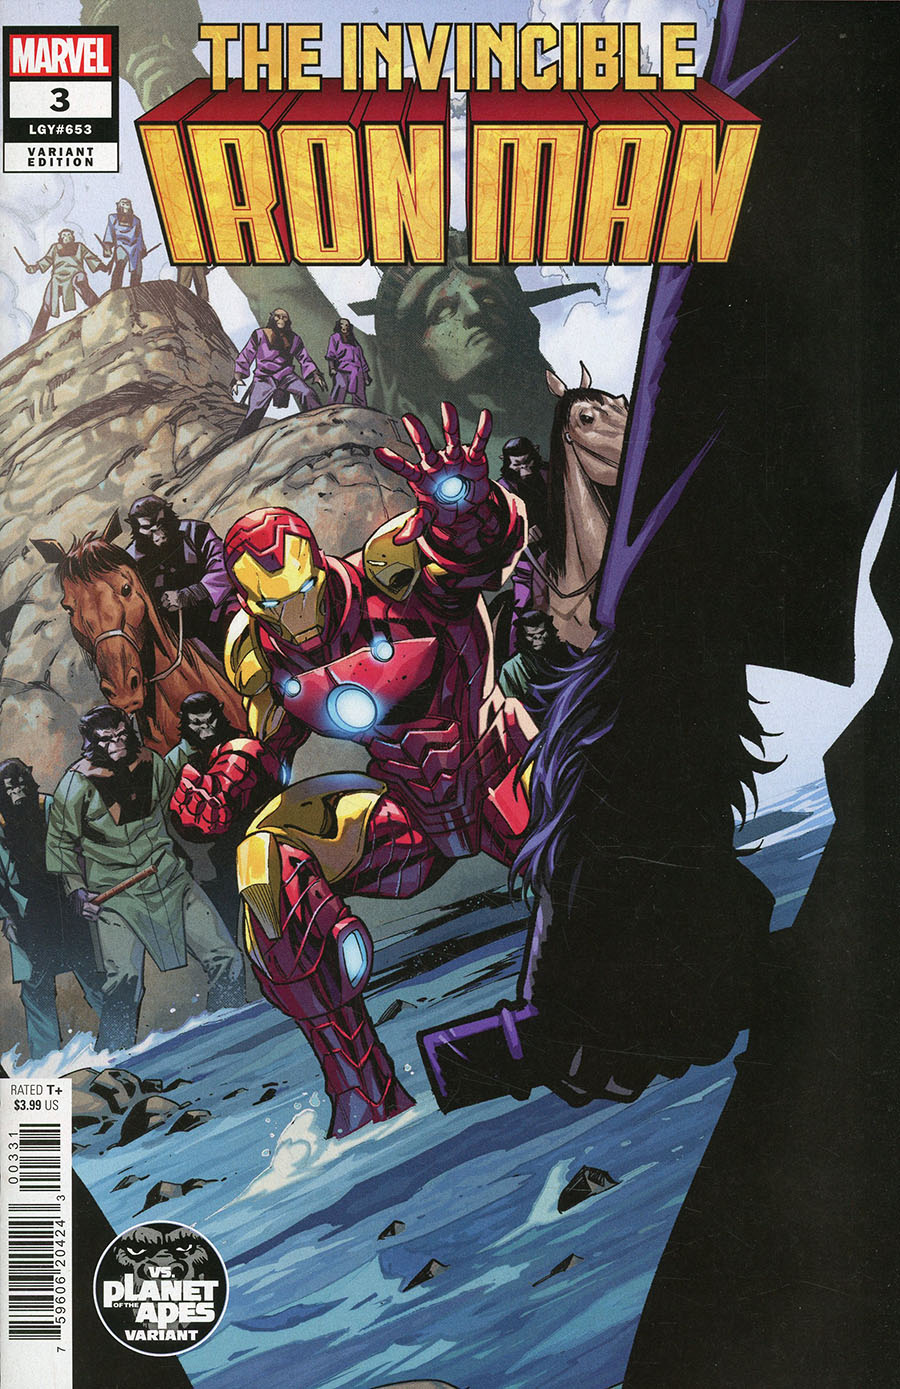 Invincible Iron Man Vol 4 #3 Cover C Variant Francesco Manna Planet Of The Apes Cover